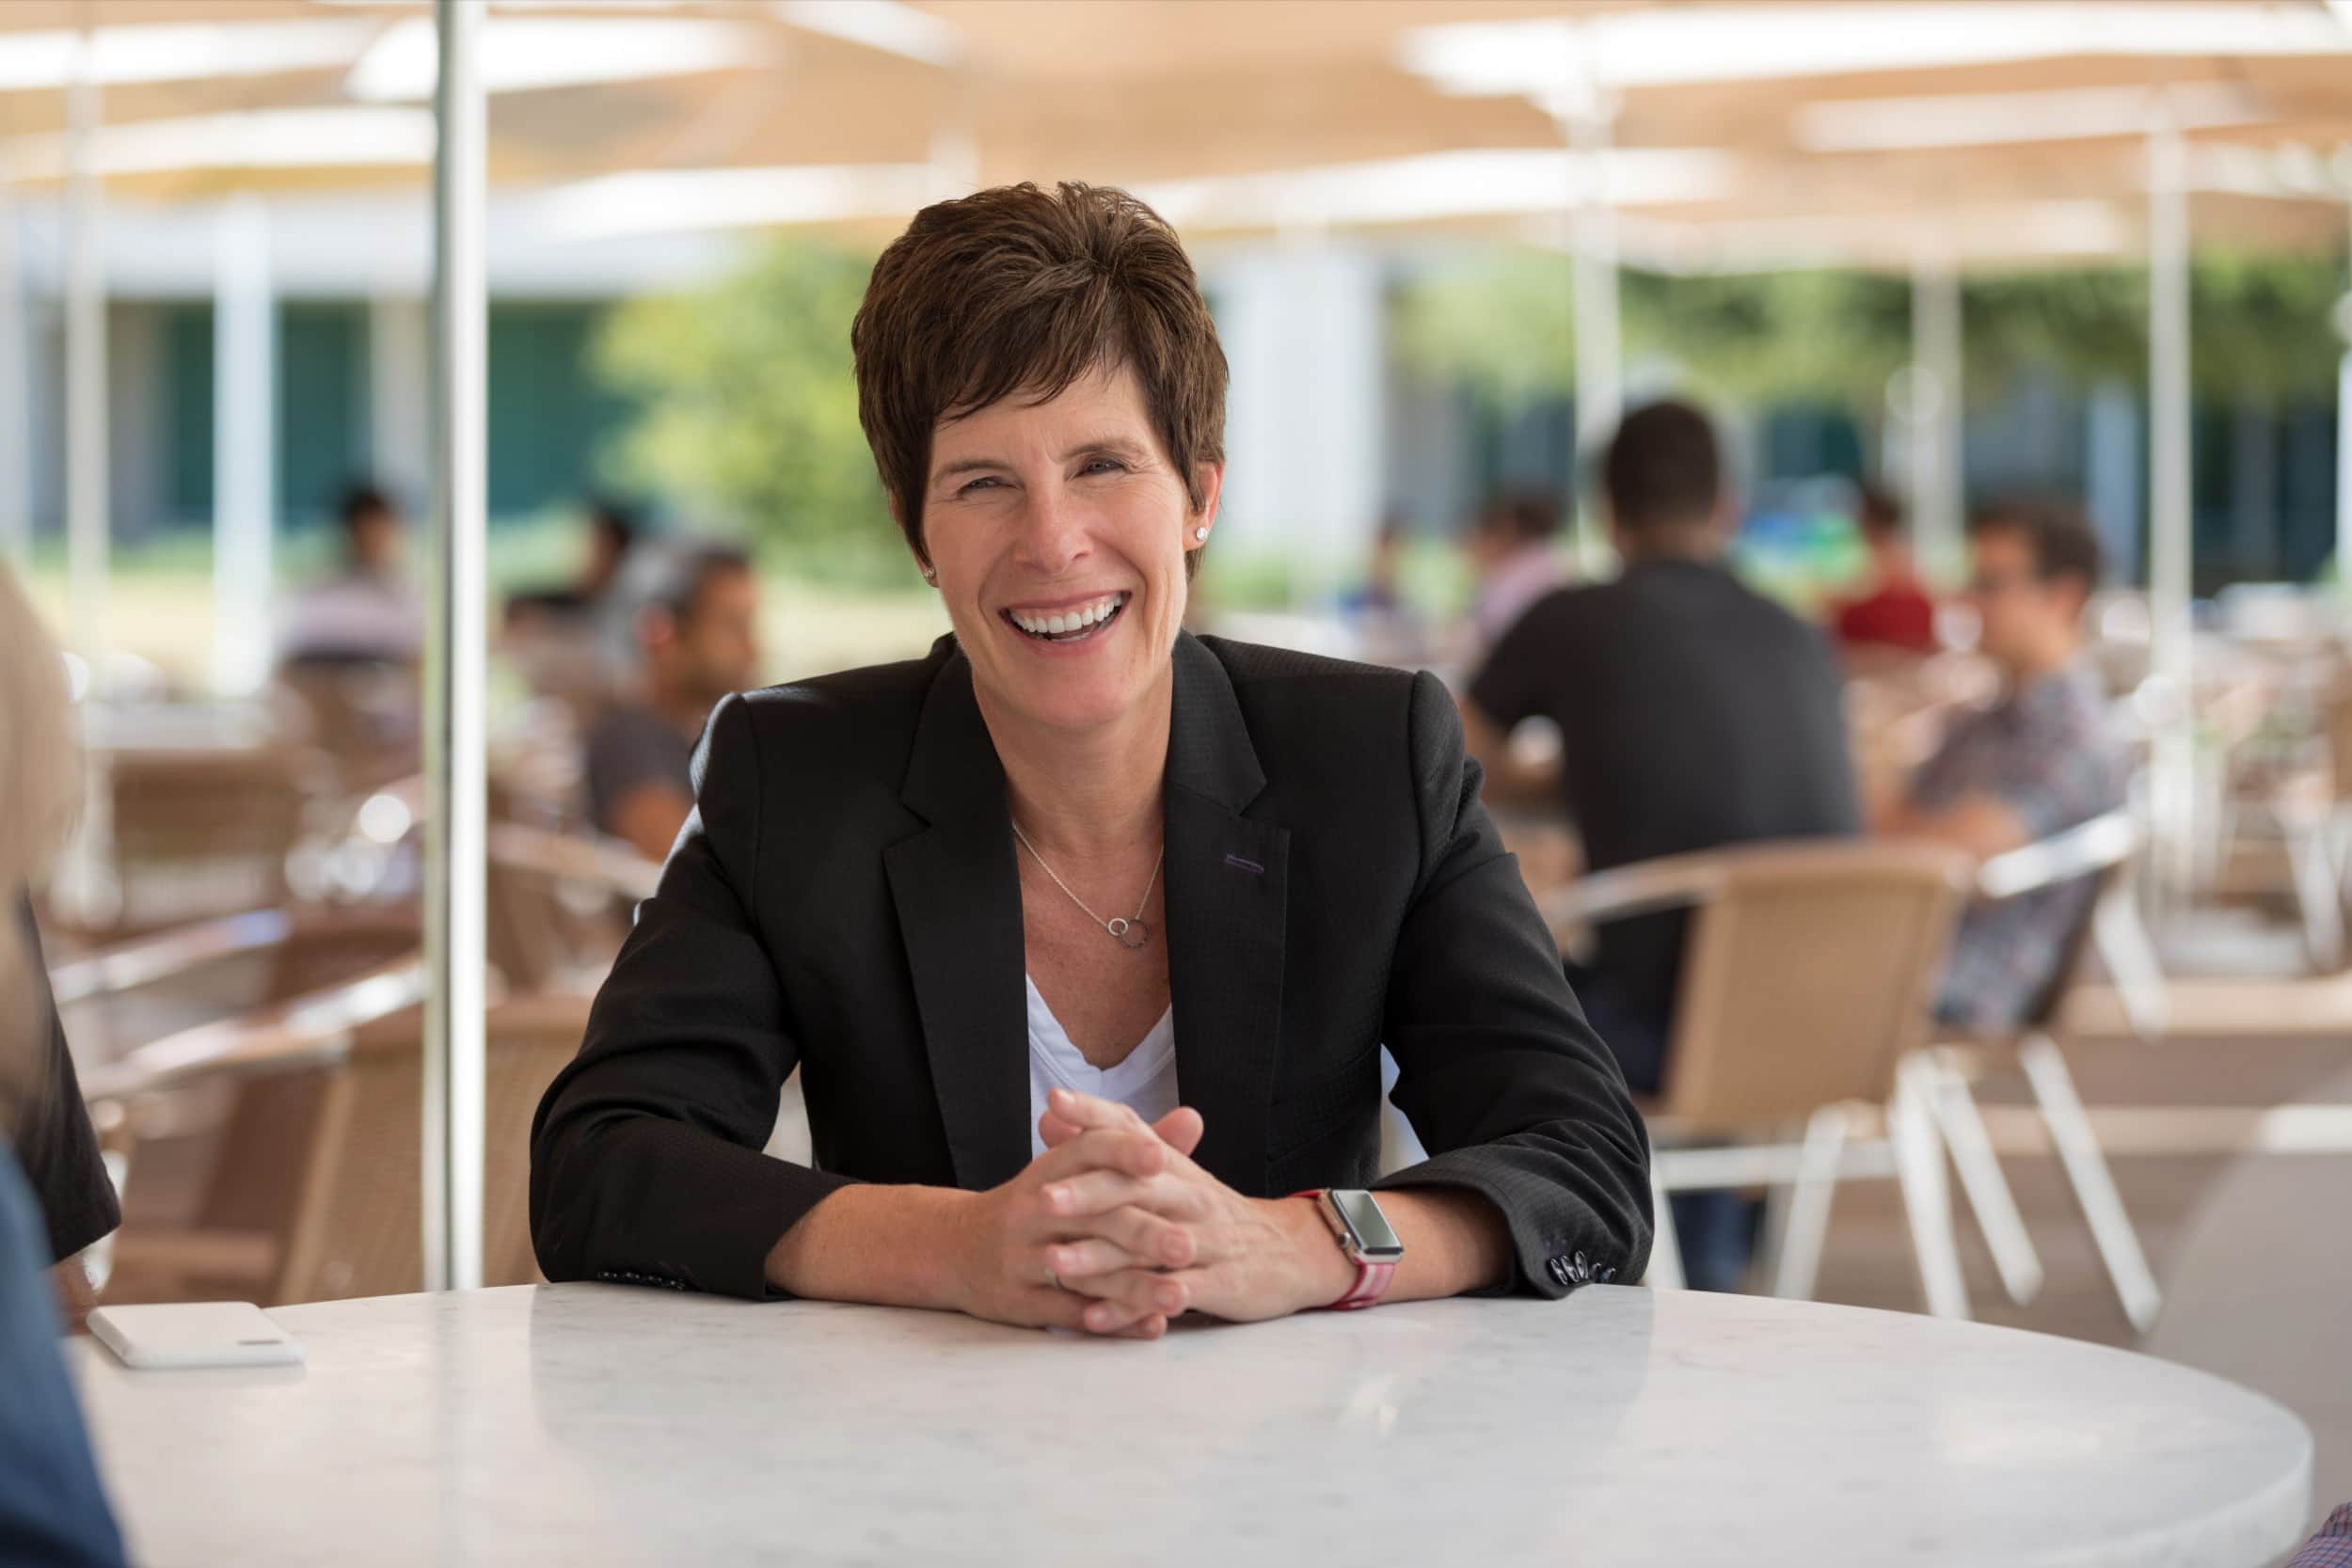 Deirdre O’Brien, a 30-year Apple veteran, will lead Apple’s Retail and People teams.